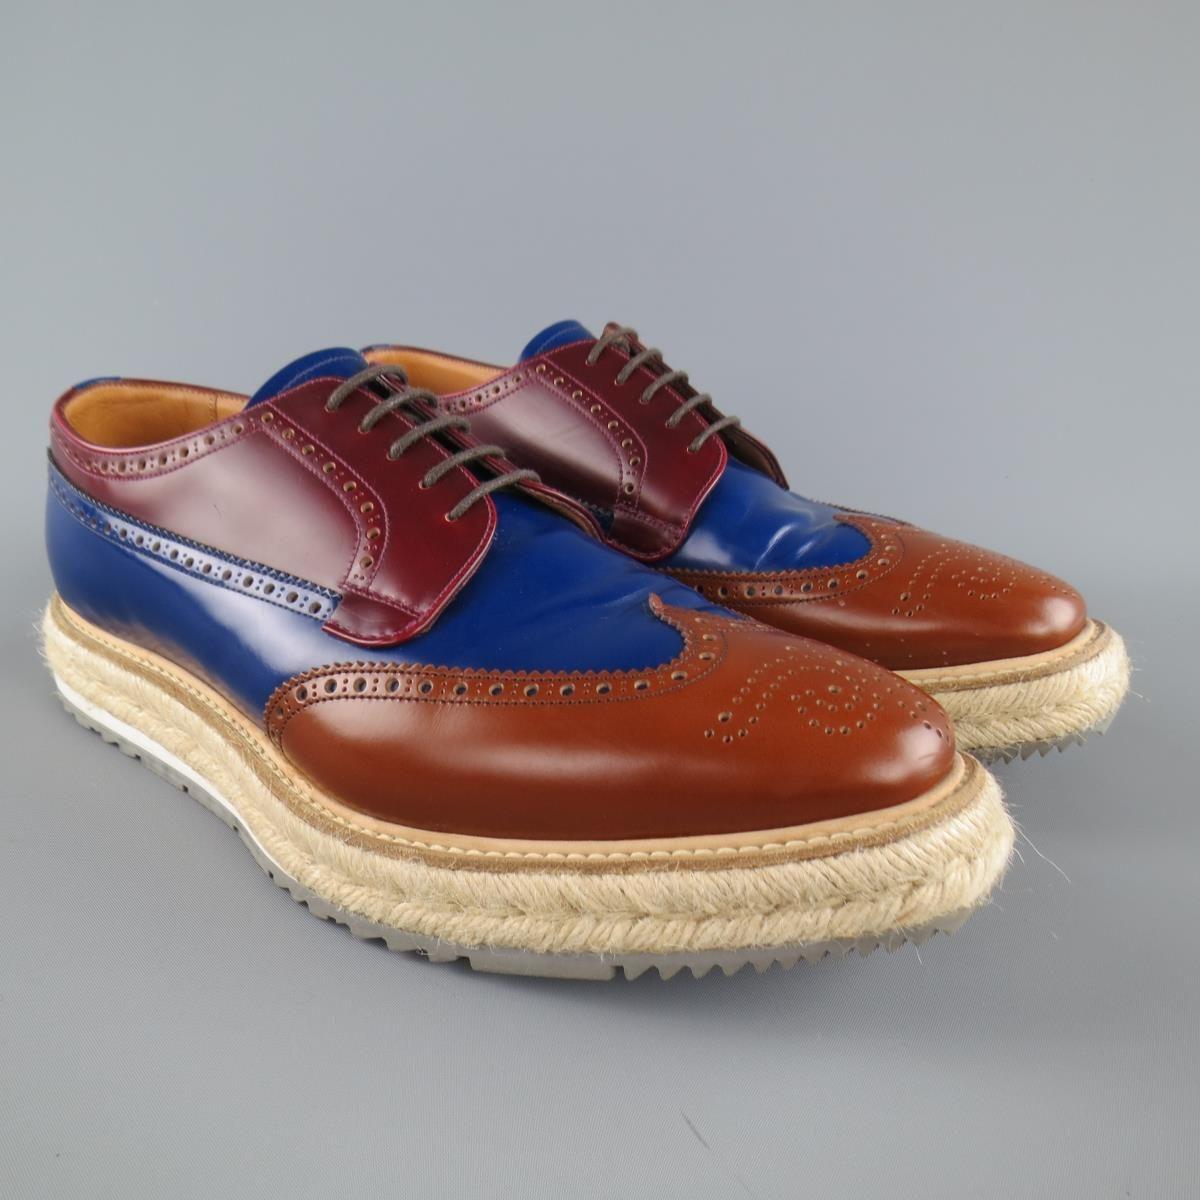 Iconic Spring Summer 2011 Collection PRADA brogues come in burgundy, navy blue, and tan color block leather and feature a wingtip, perforated brogue details, and thick braided espadrille sole.  With box. Made in Italy.
 
Excellent Pre-Owned